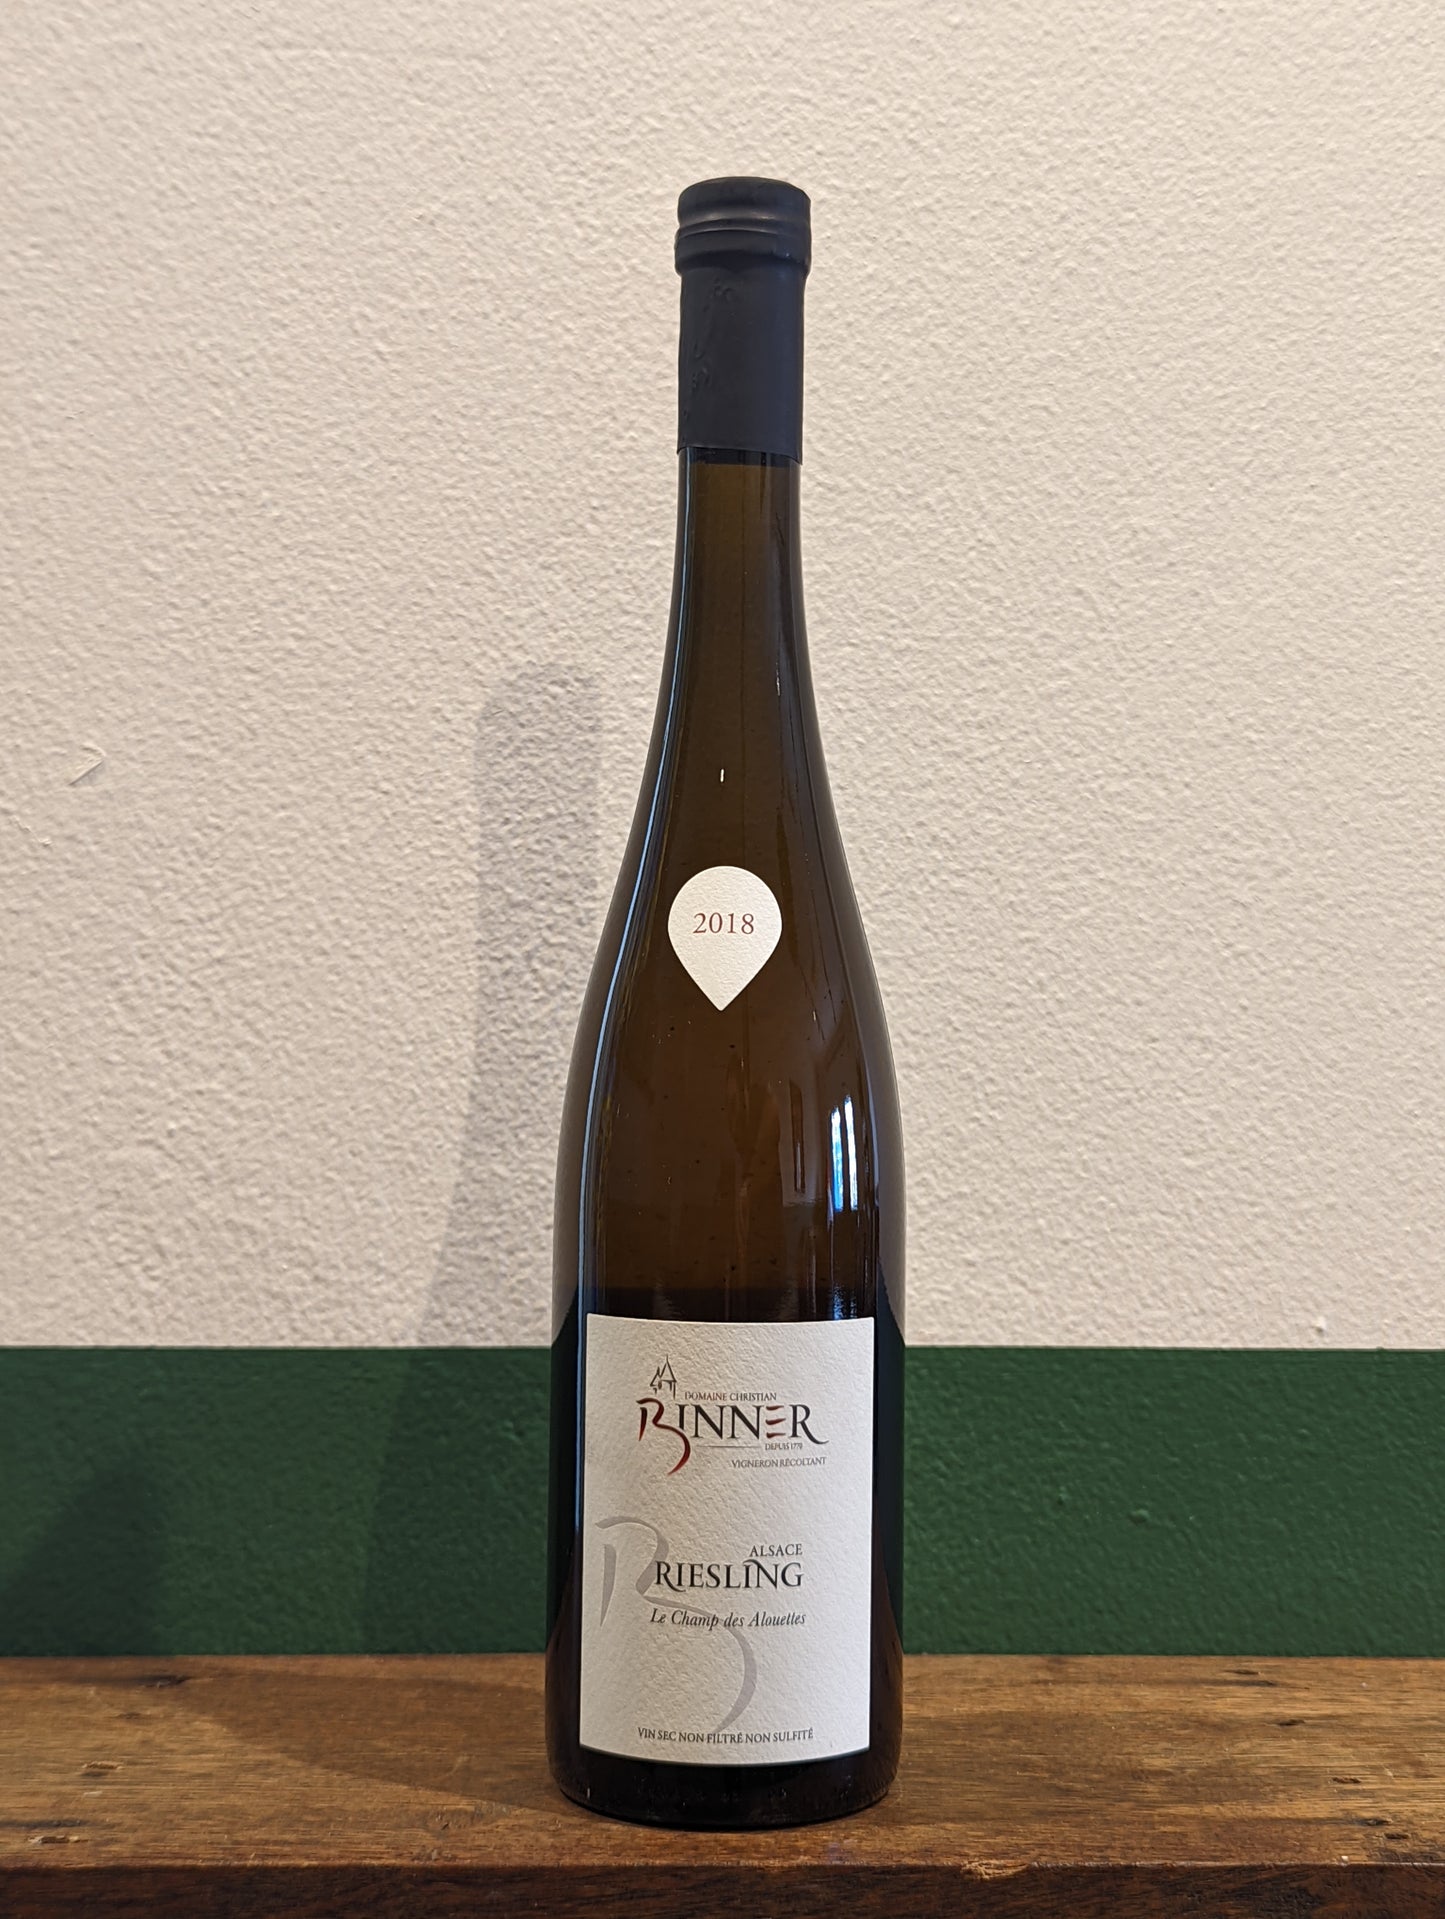 Christian Binner - Les Champs des Alouettes Riesling 2018